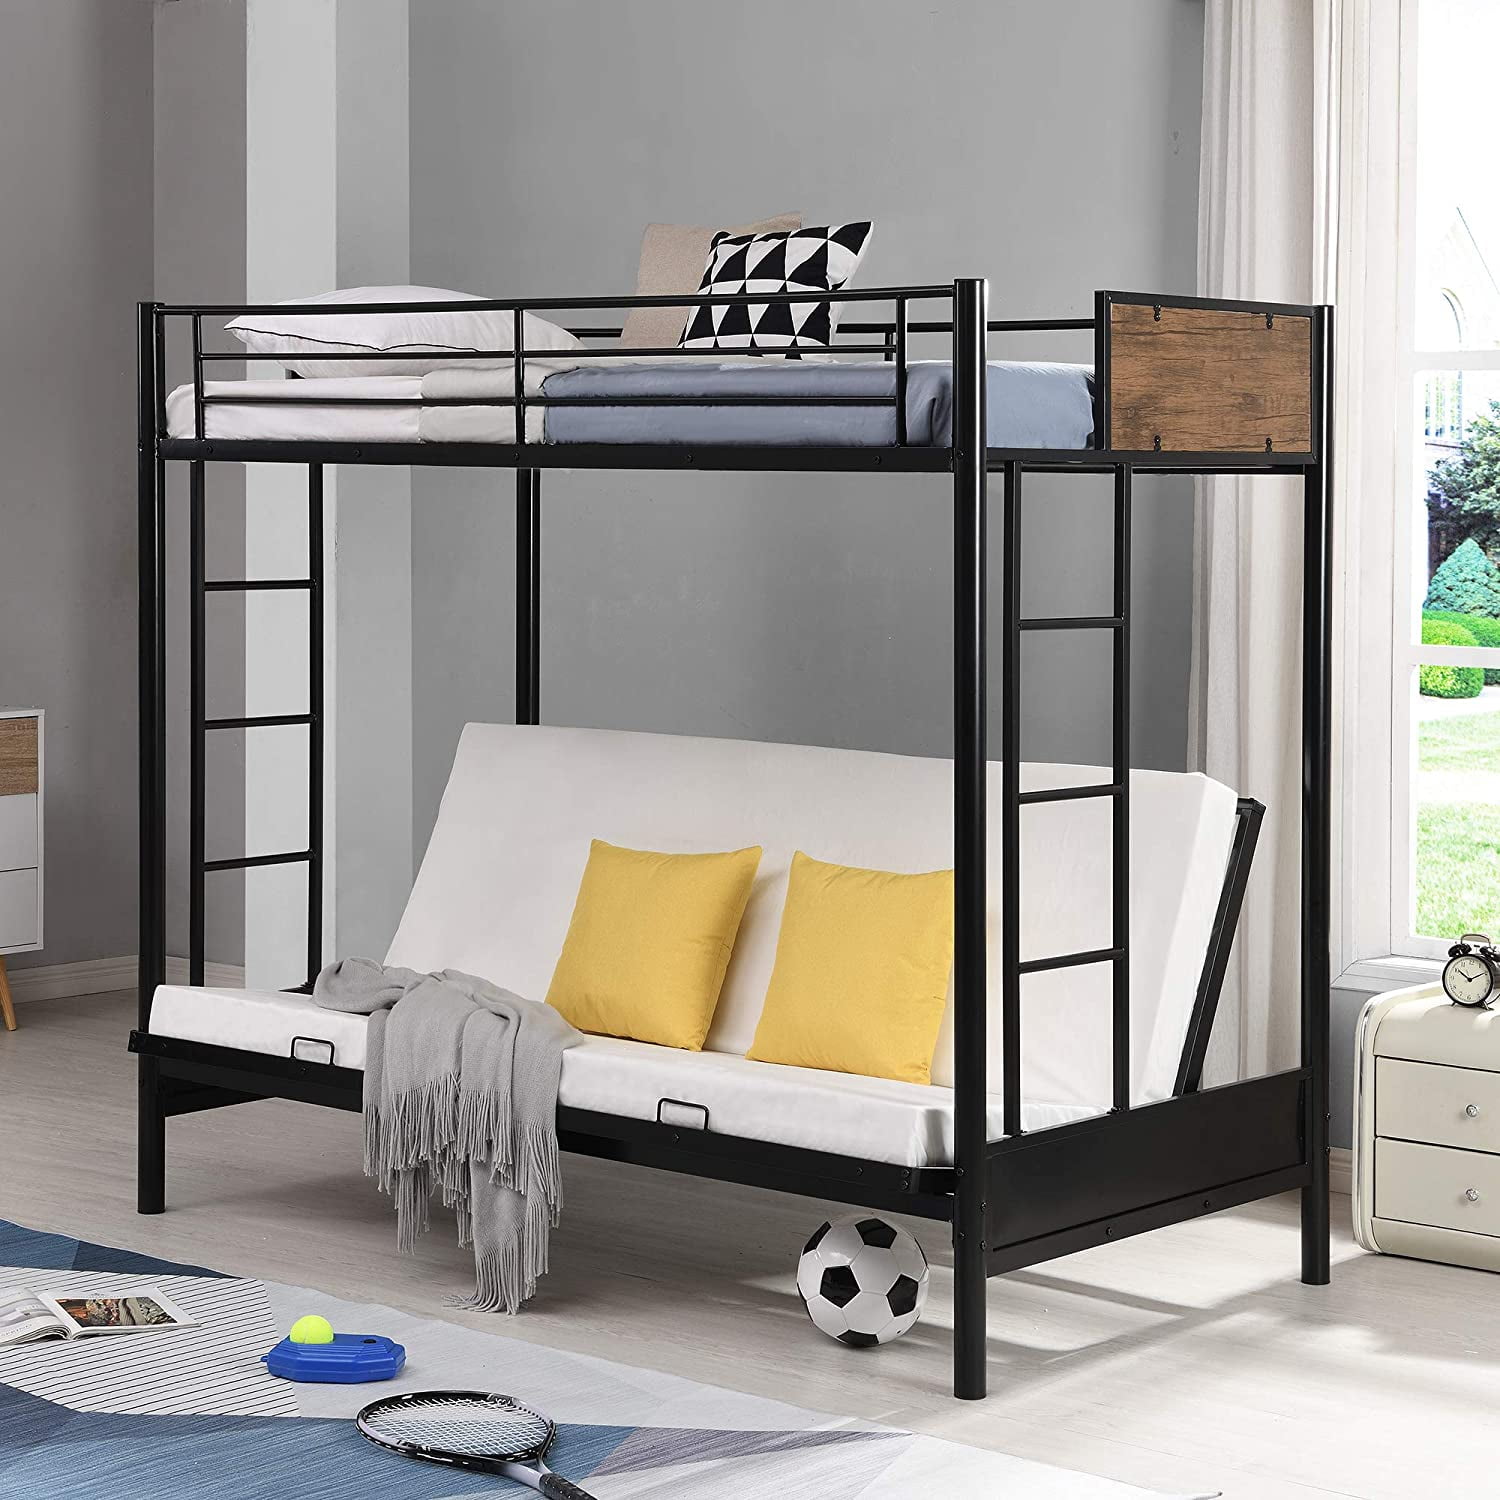 Piscis Convertible Twin Over Futon Bed, Rooms To Go Full Over Futon Bunk Bed